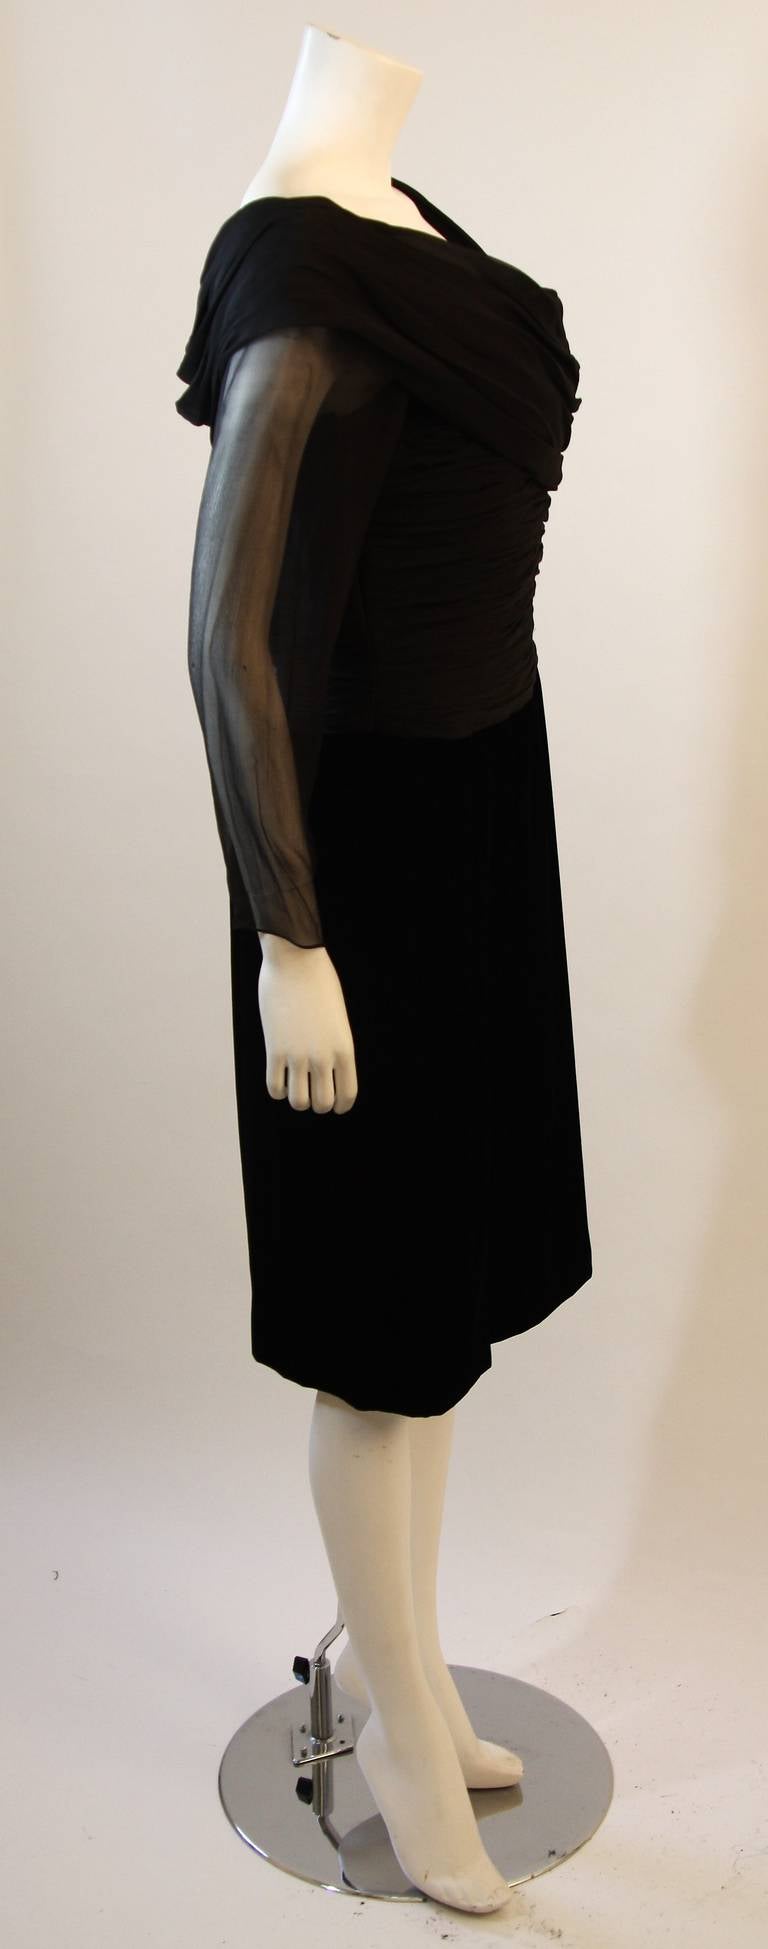 Oscar De La Renta Classic Draped Chiffon and Velvet Cocktail Dress Size 14 In Excellent Condition For Sale In Los Angeles, CA